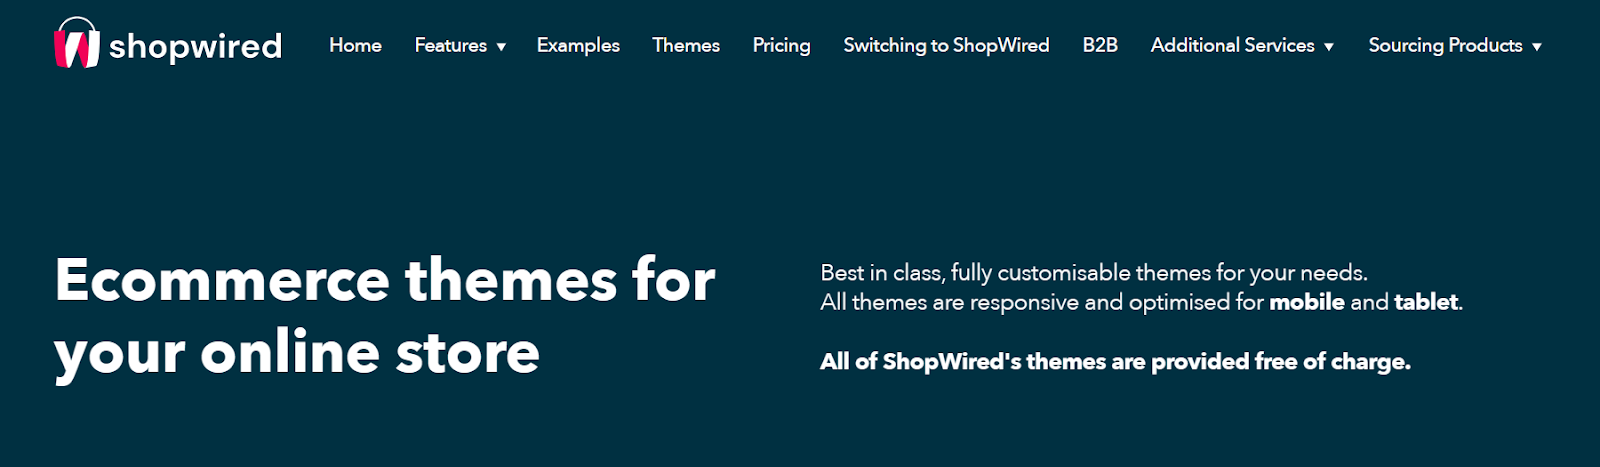 ShopWired Themes Are Free